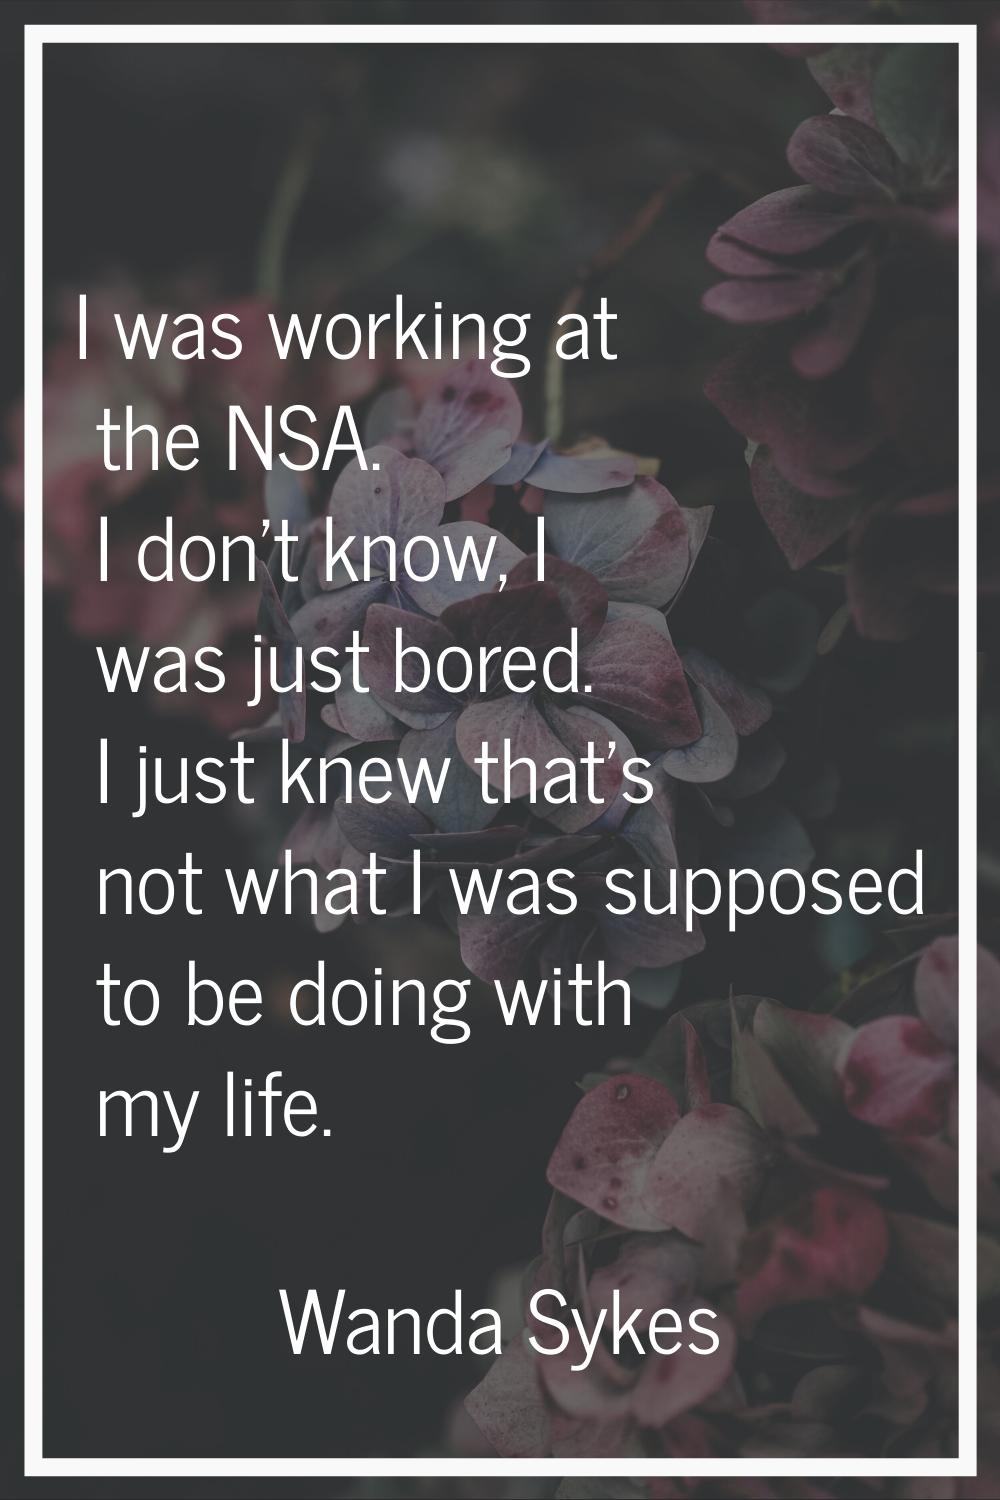 I was working at the NSA. I don't know, I was just bored. I just knew that's not what I was suppose